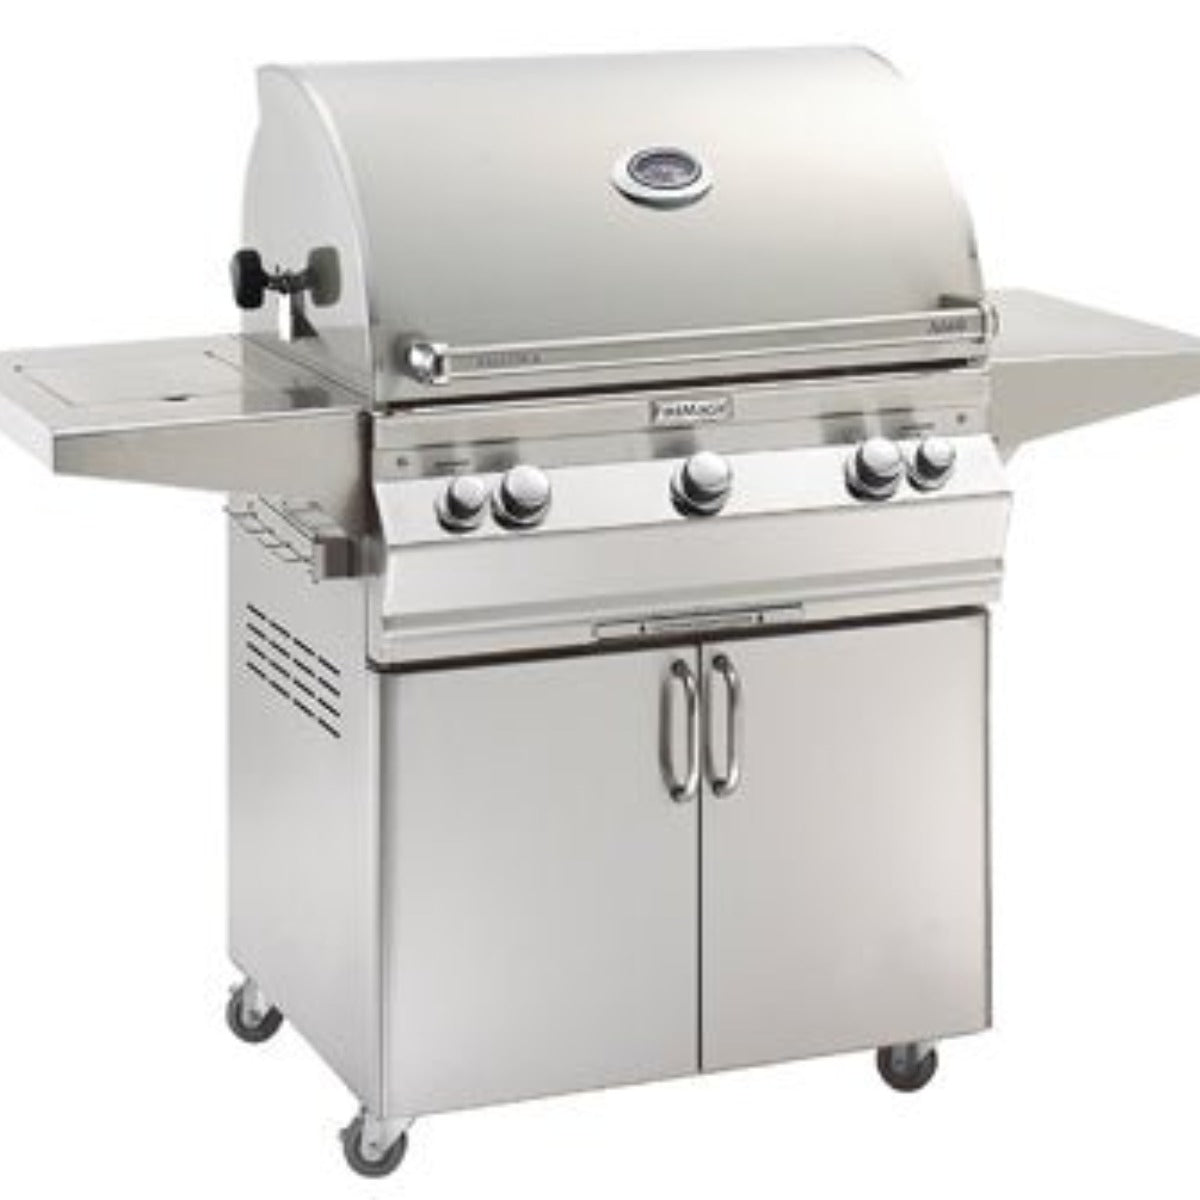 Fire Magic Grills Aurora A660s Portable Grill with Rotisserie Kit &amp; Side Burner. High-quality outdoor grilling - Outdoorium